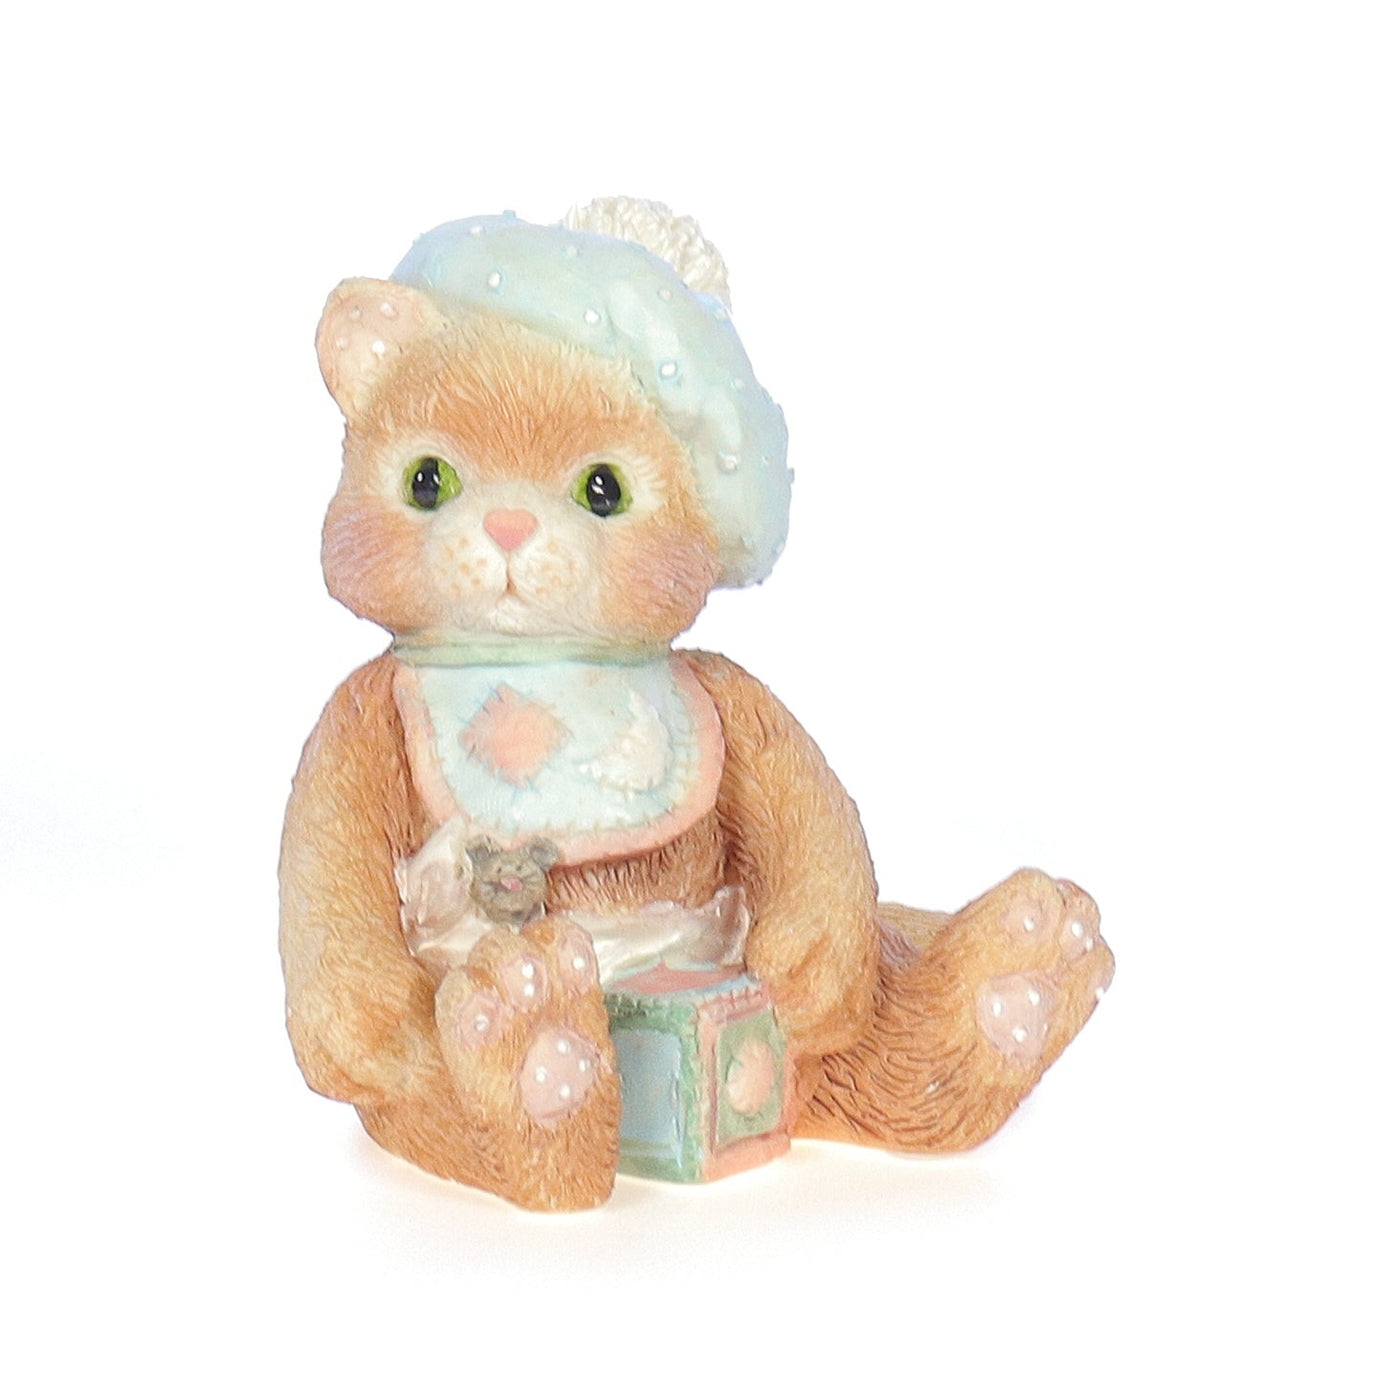 Calico_Kittens_A_Bundle_of_Love_Family_Figurine_1992